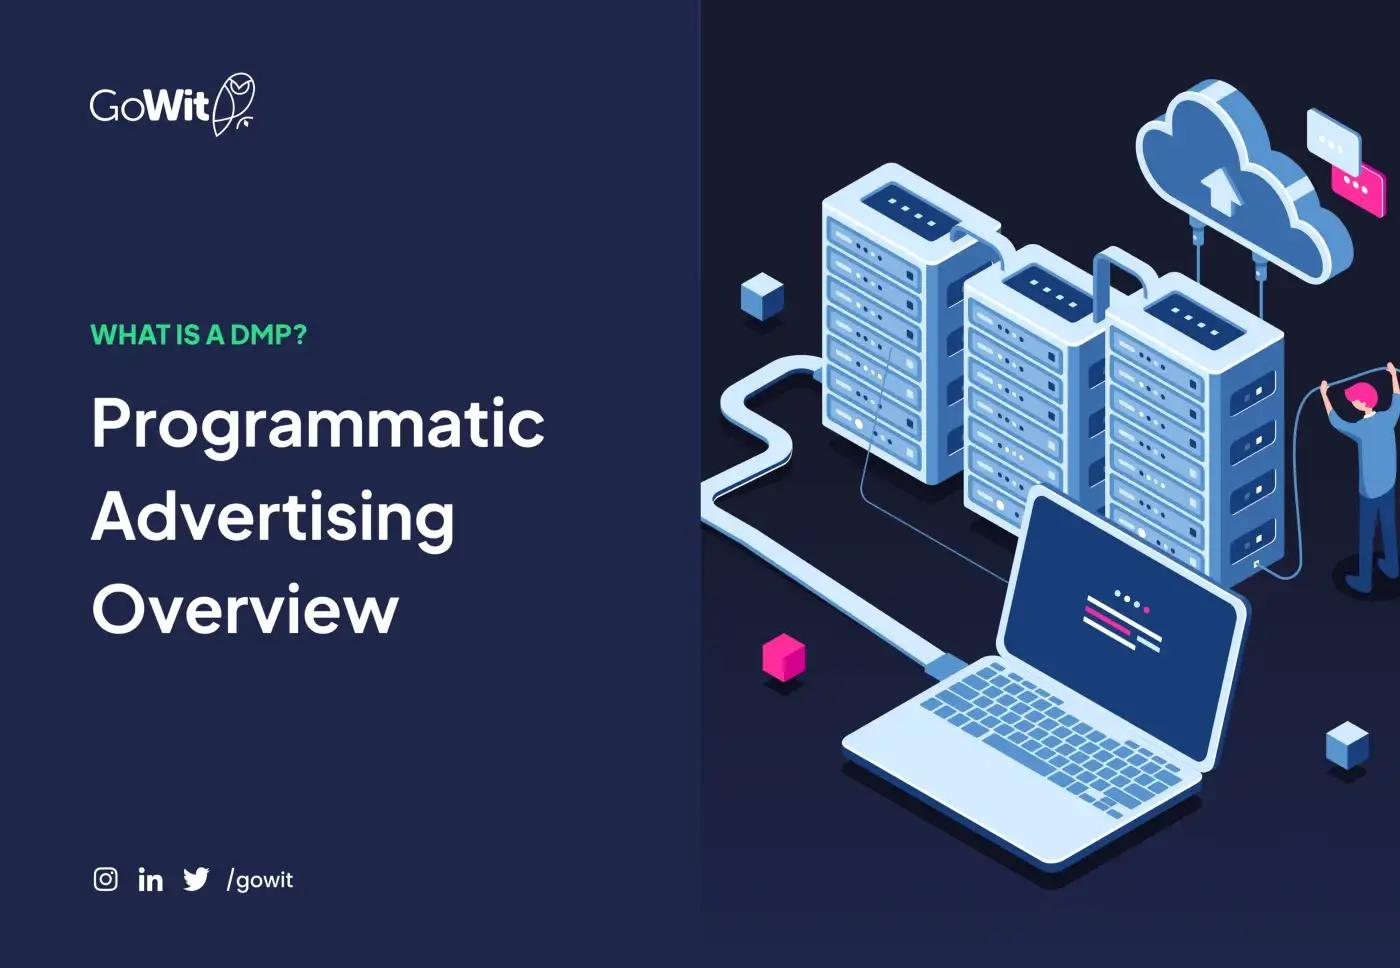 Programmatic Advertising Overview: What is a DMP?